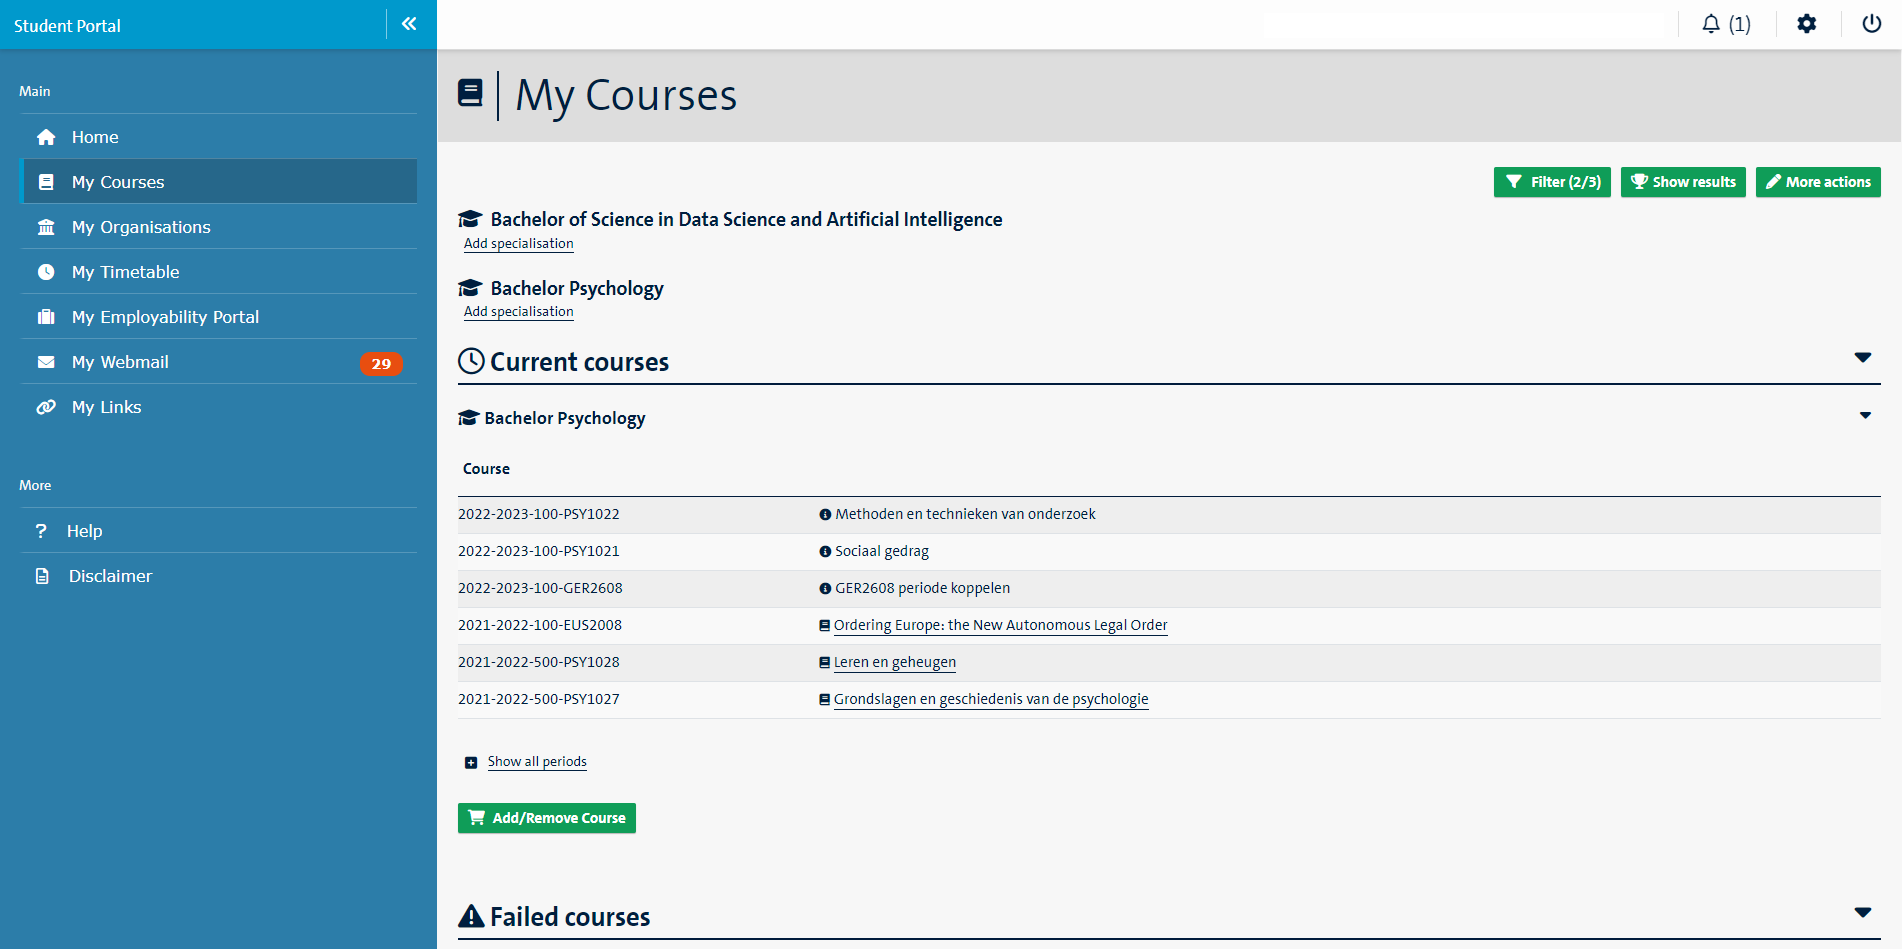 My courses overview